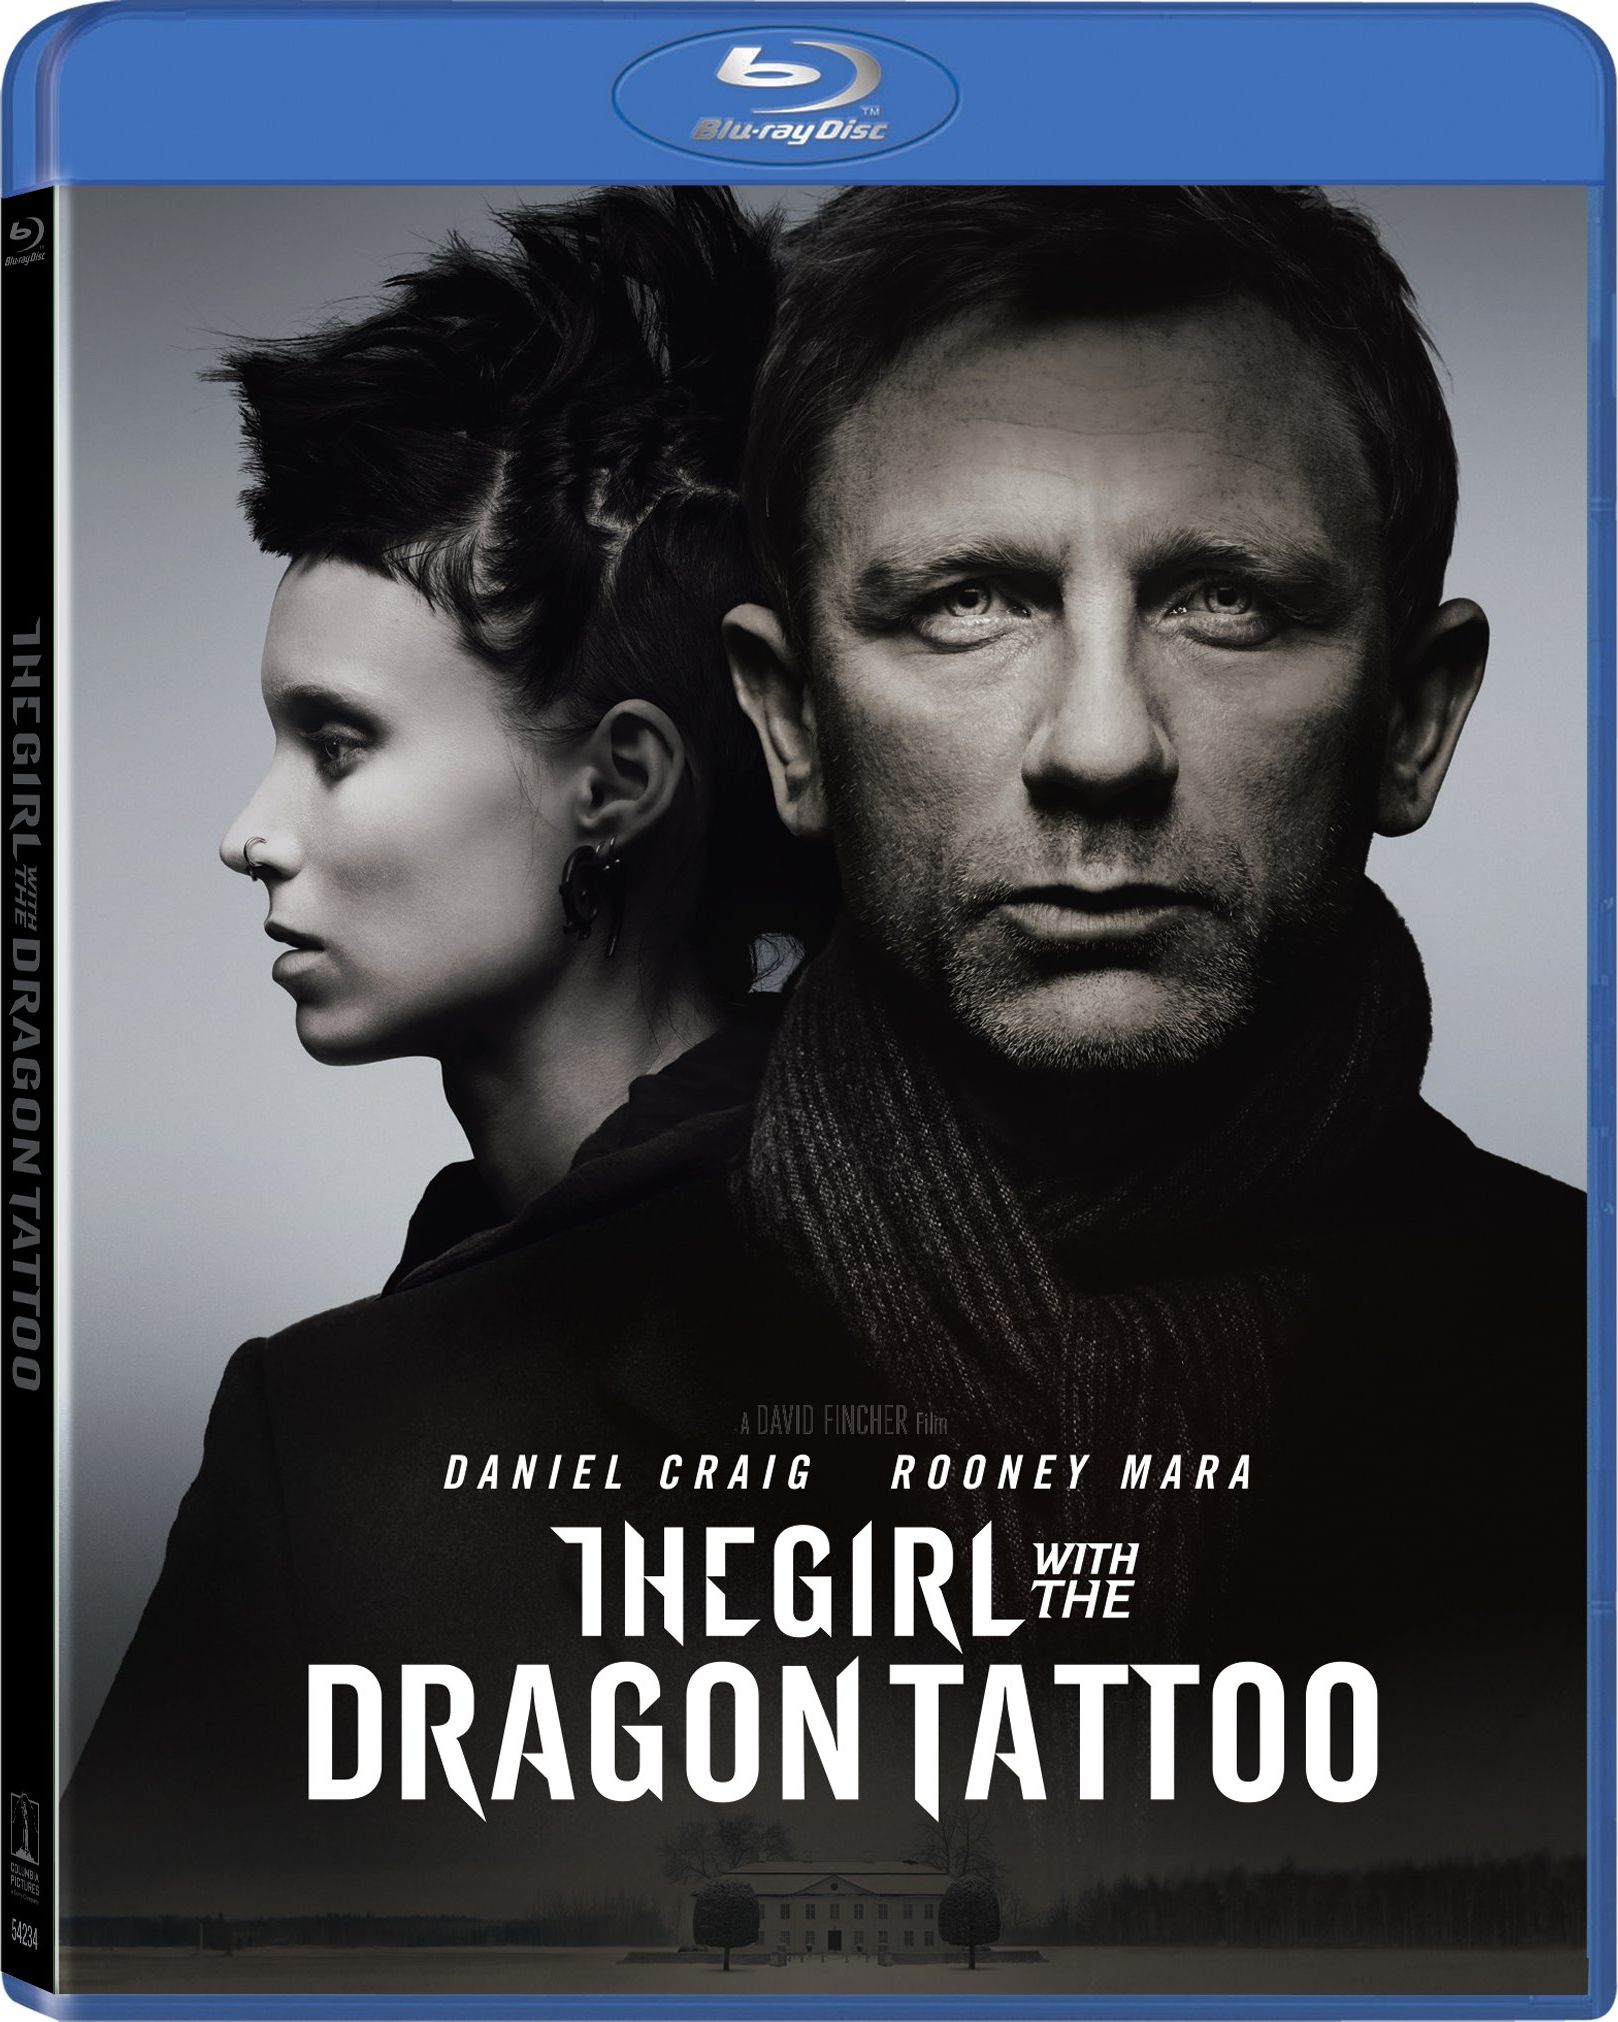 The Girl with the Dragon Tattoo DVD Release Date March 20, 2012